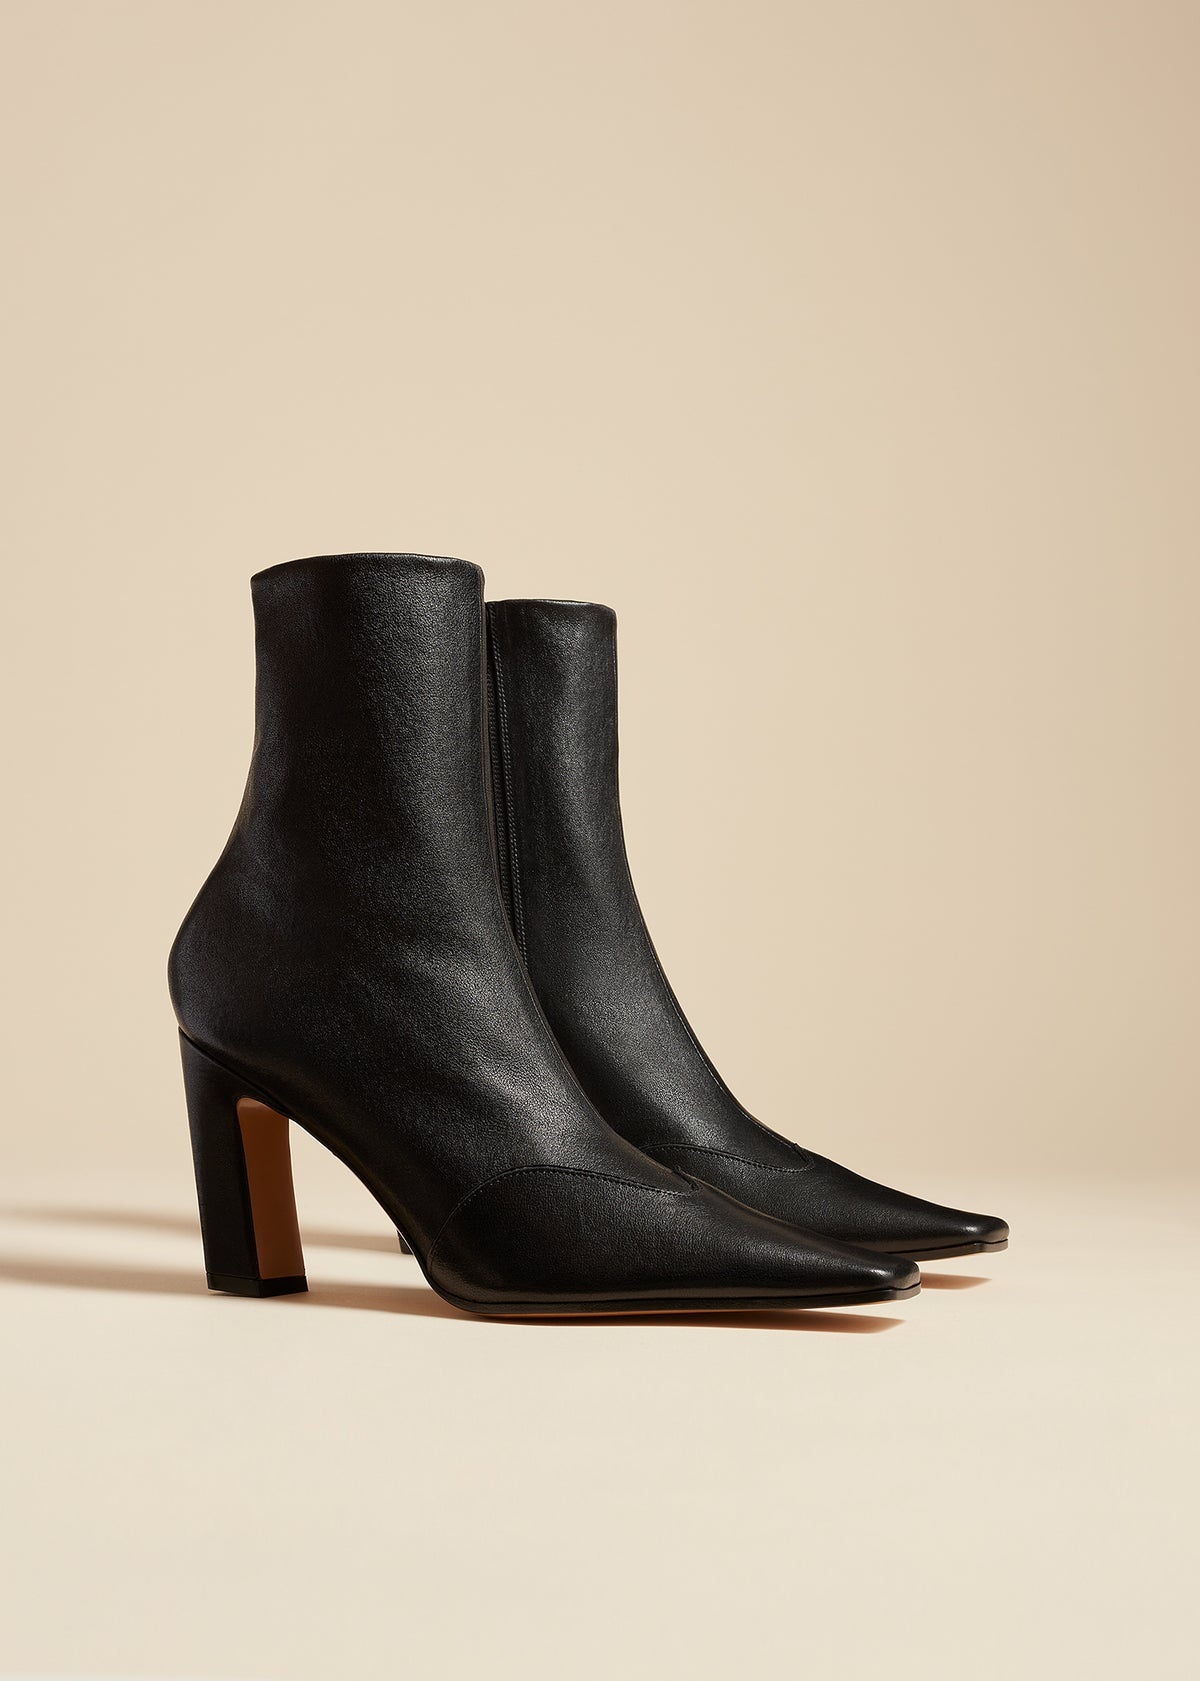 The Nevada Stretch High Boot in Black Nappa Leather - 2